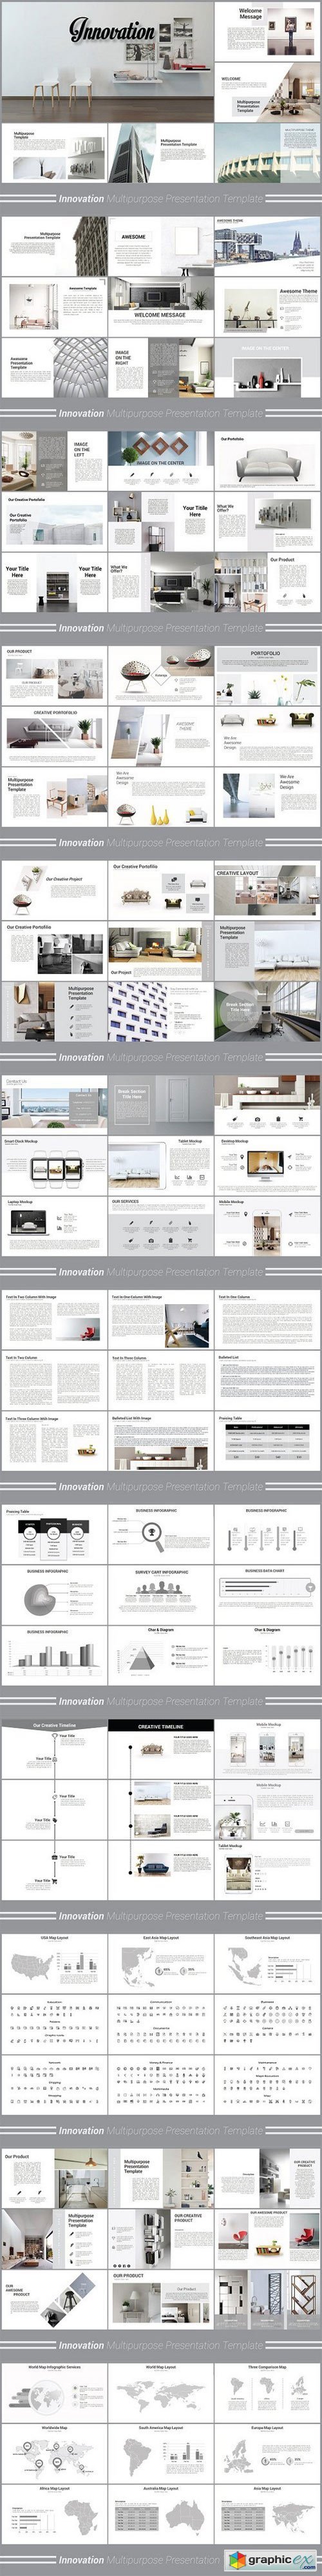 Innovation Powerpoint Template 1200789